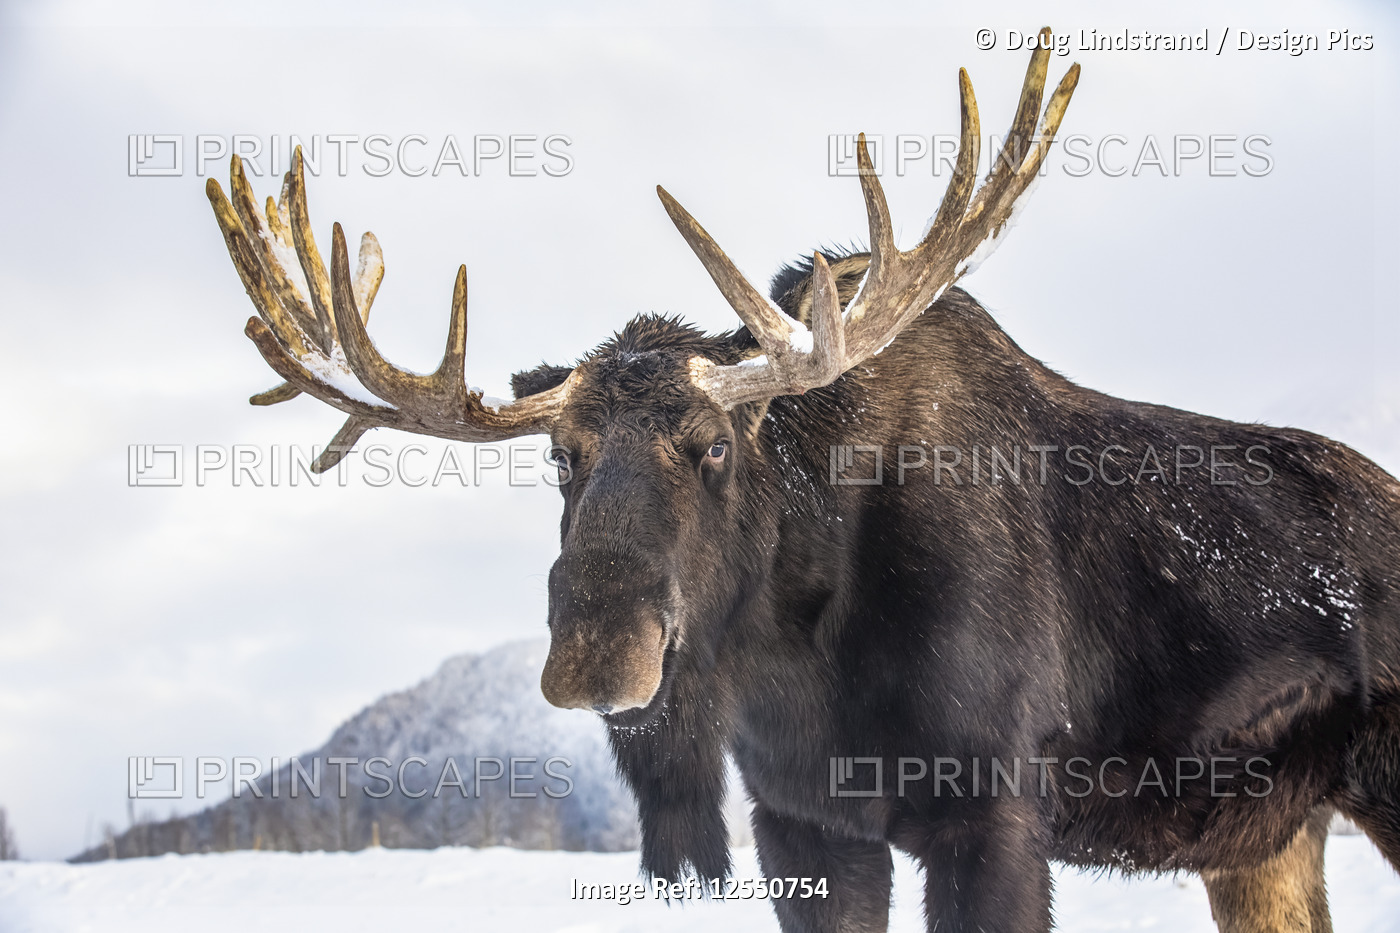 Mature bull moose (Alces alces) with antlers shed of velvet standing in snow, ...